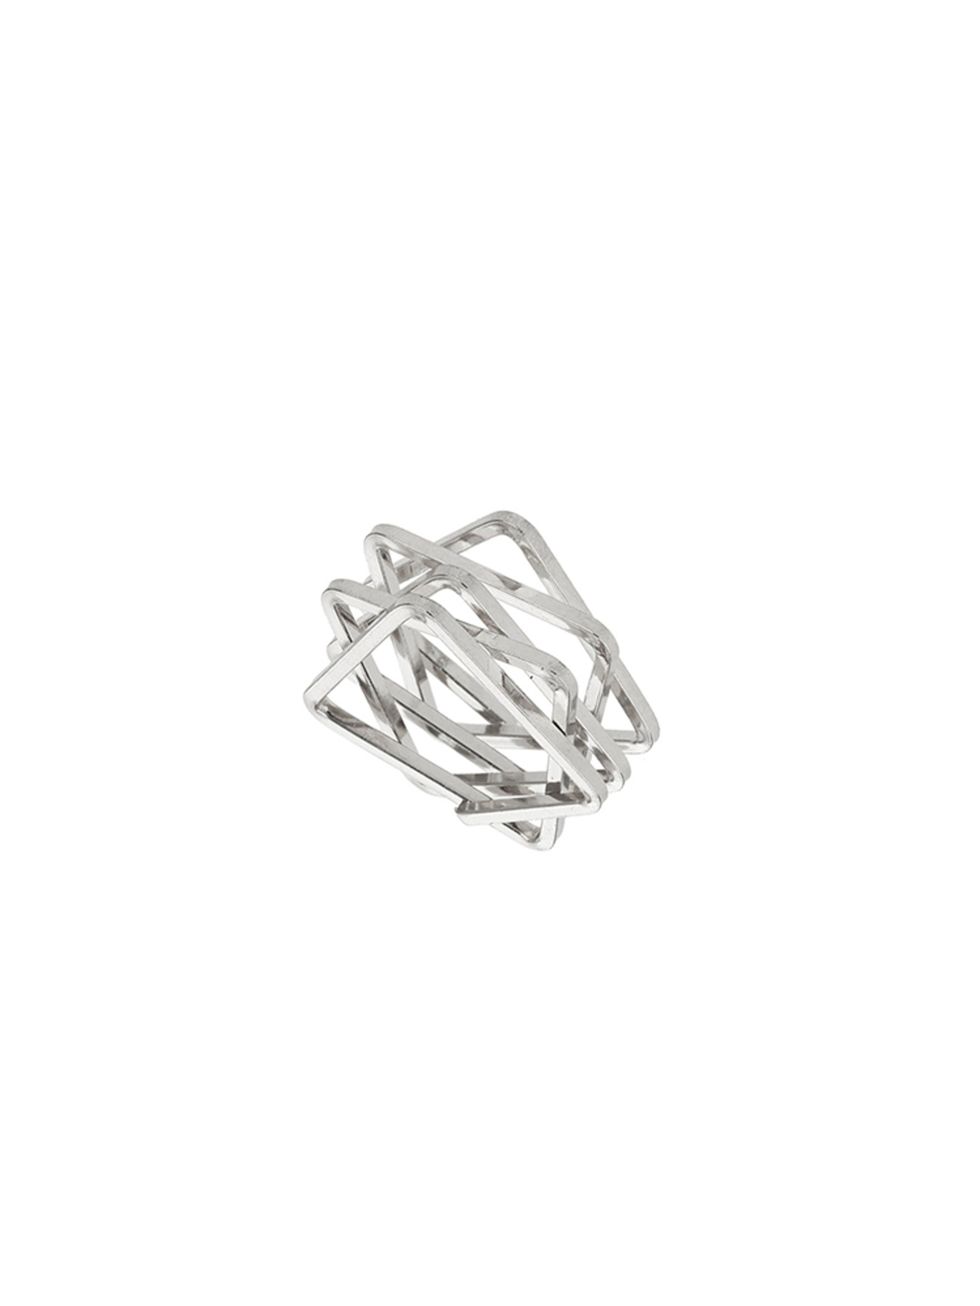 <p><a href="http://www.dorothyperkins.com/en/dpuk/product/accessories-203537/fashion-jewellery-203576/rings-203920/silver-square-stack-ring-4060938?refinements=category~%5b212422%7c208724%5d&bi=1&ps=20" target="_blank">Dorothy Perkins</a> ring, £6.50</p>